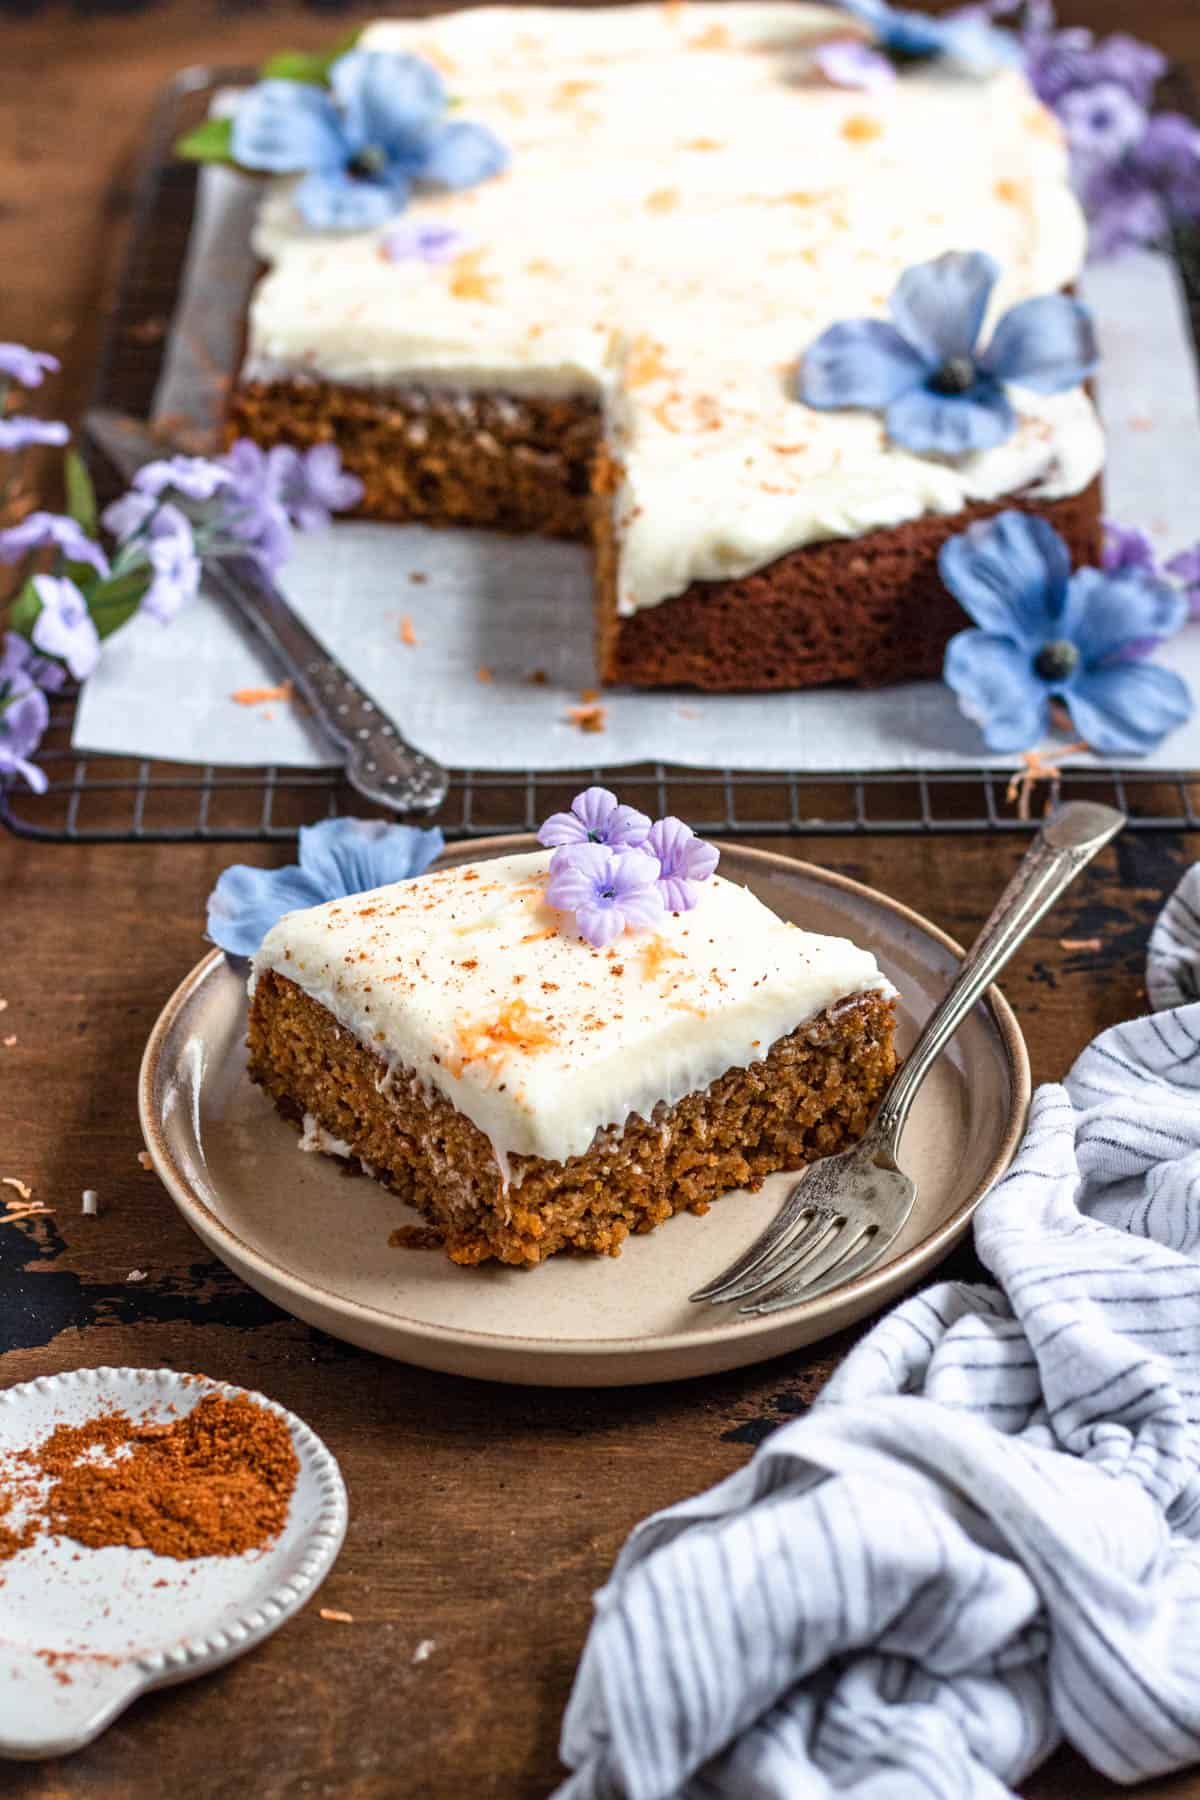 a slice of gluten free carrot cake on a round light colored plate with a silver fork, purple flowers topping the cake, and a striped towel lying next to the plate